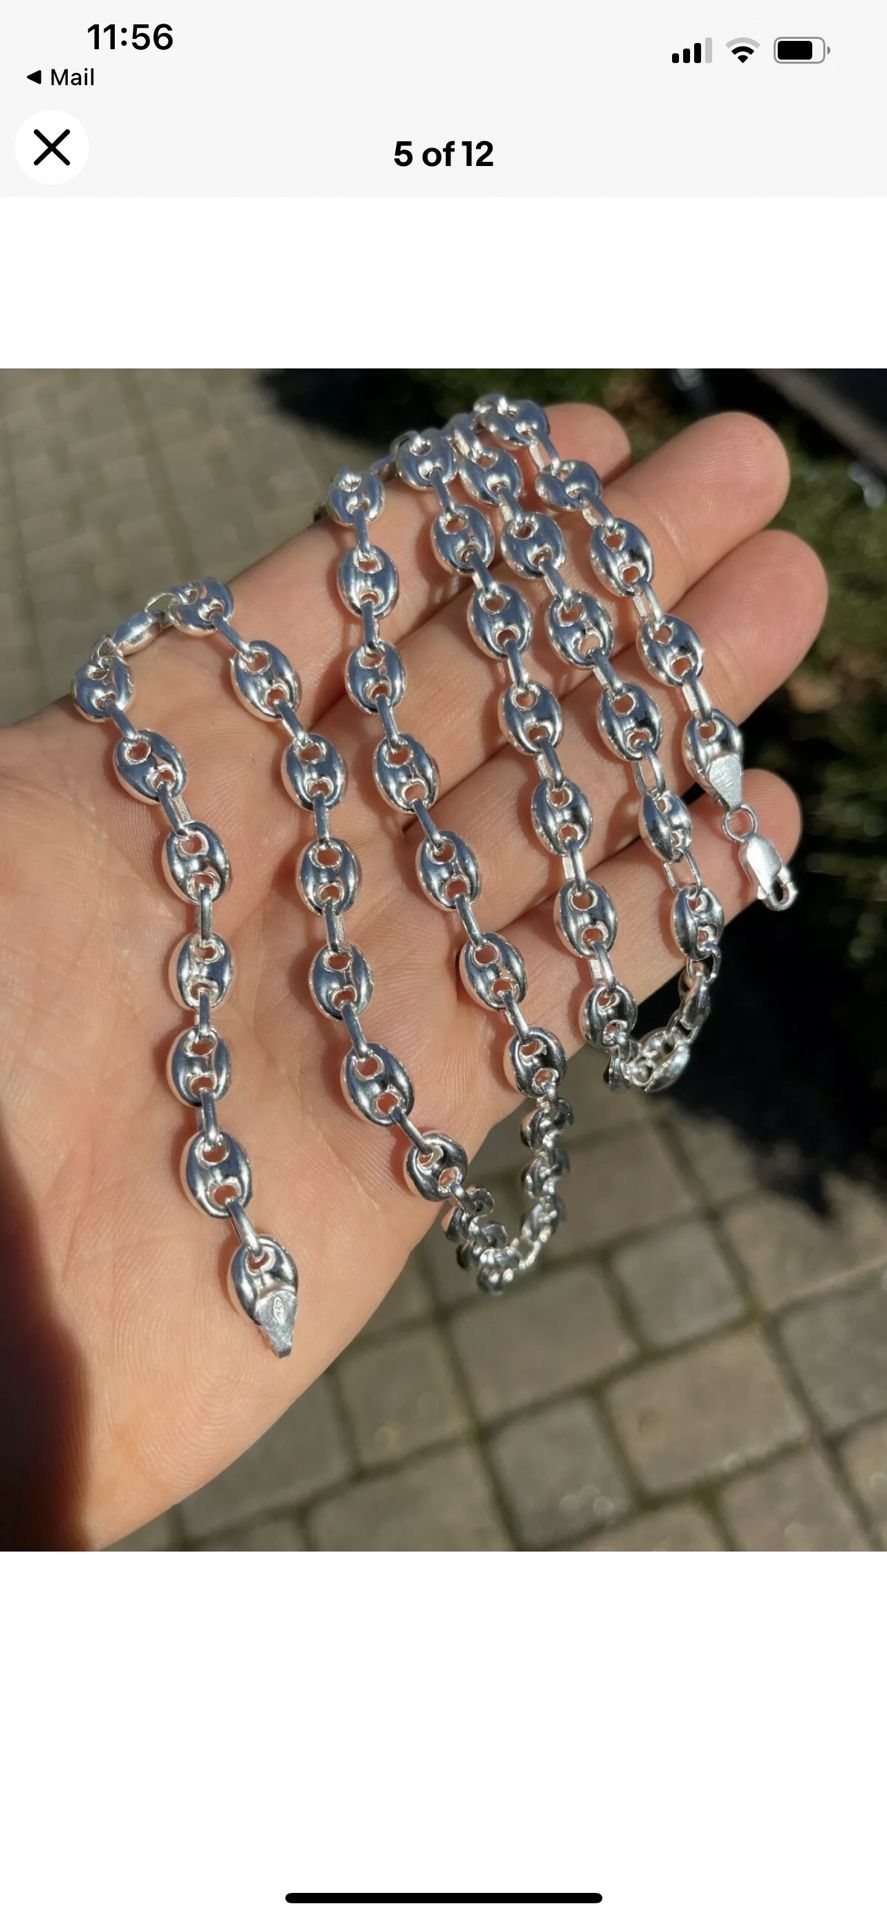 Gorgeous solid 925 sterling silverMariner bracelets  8mm wide so perfect as mens or ladies chains or bracelets    Solid 925 sterling silv